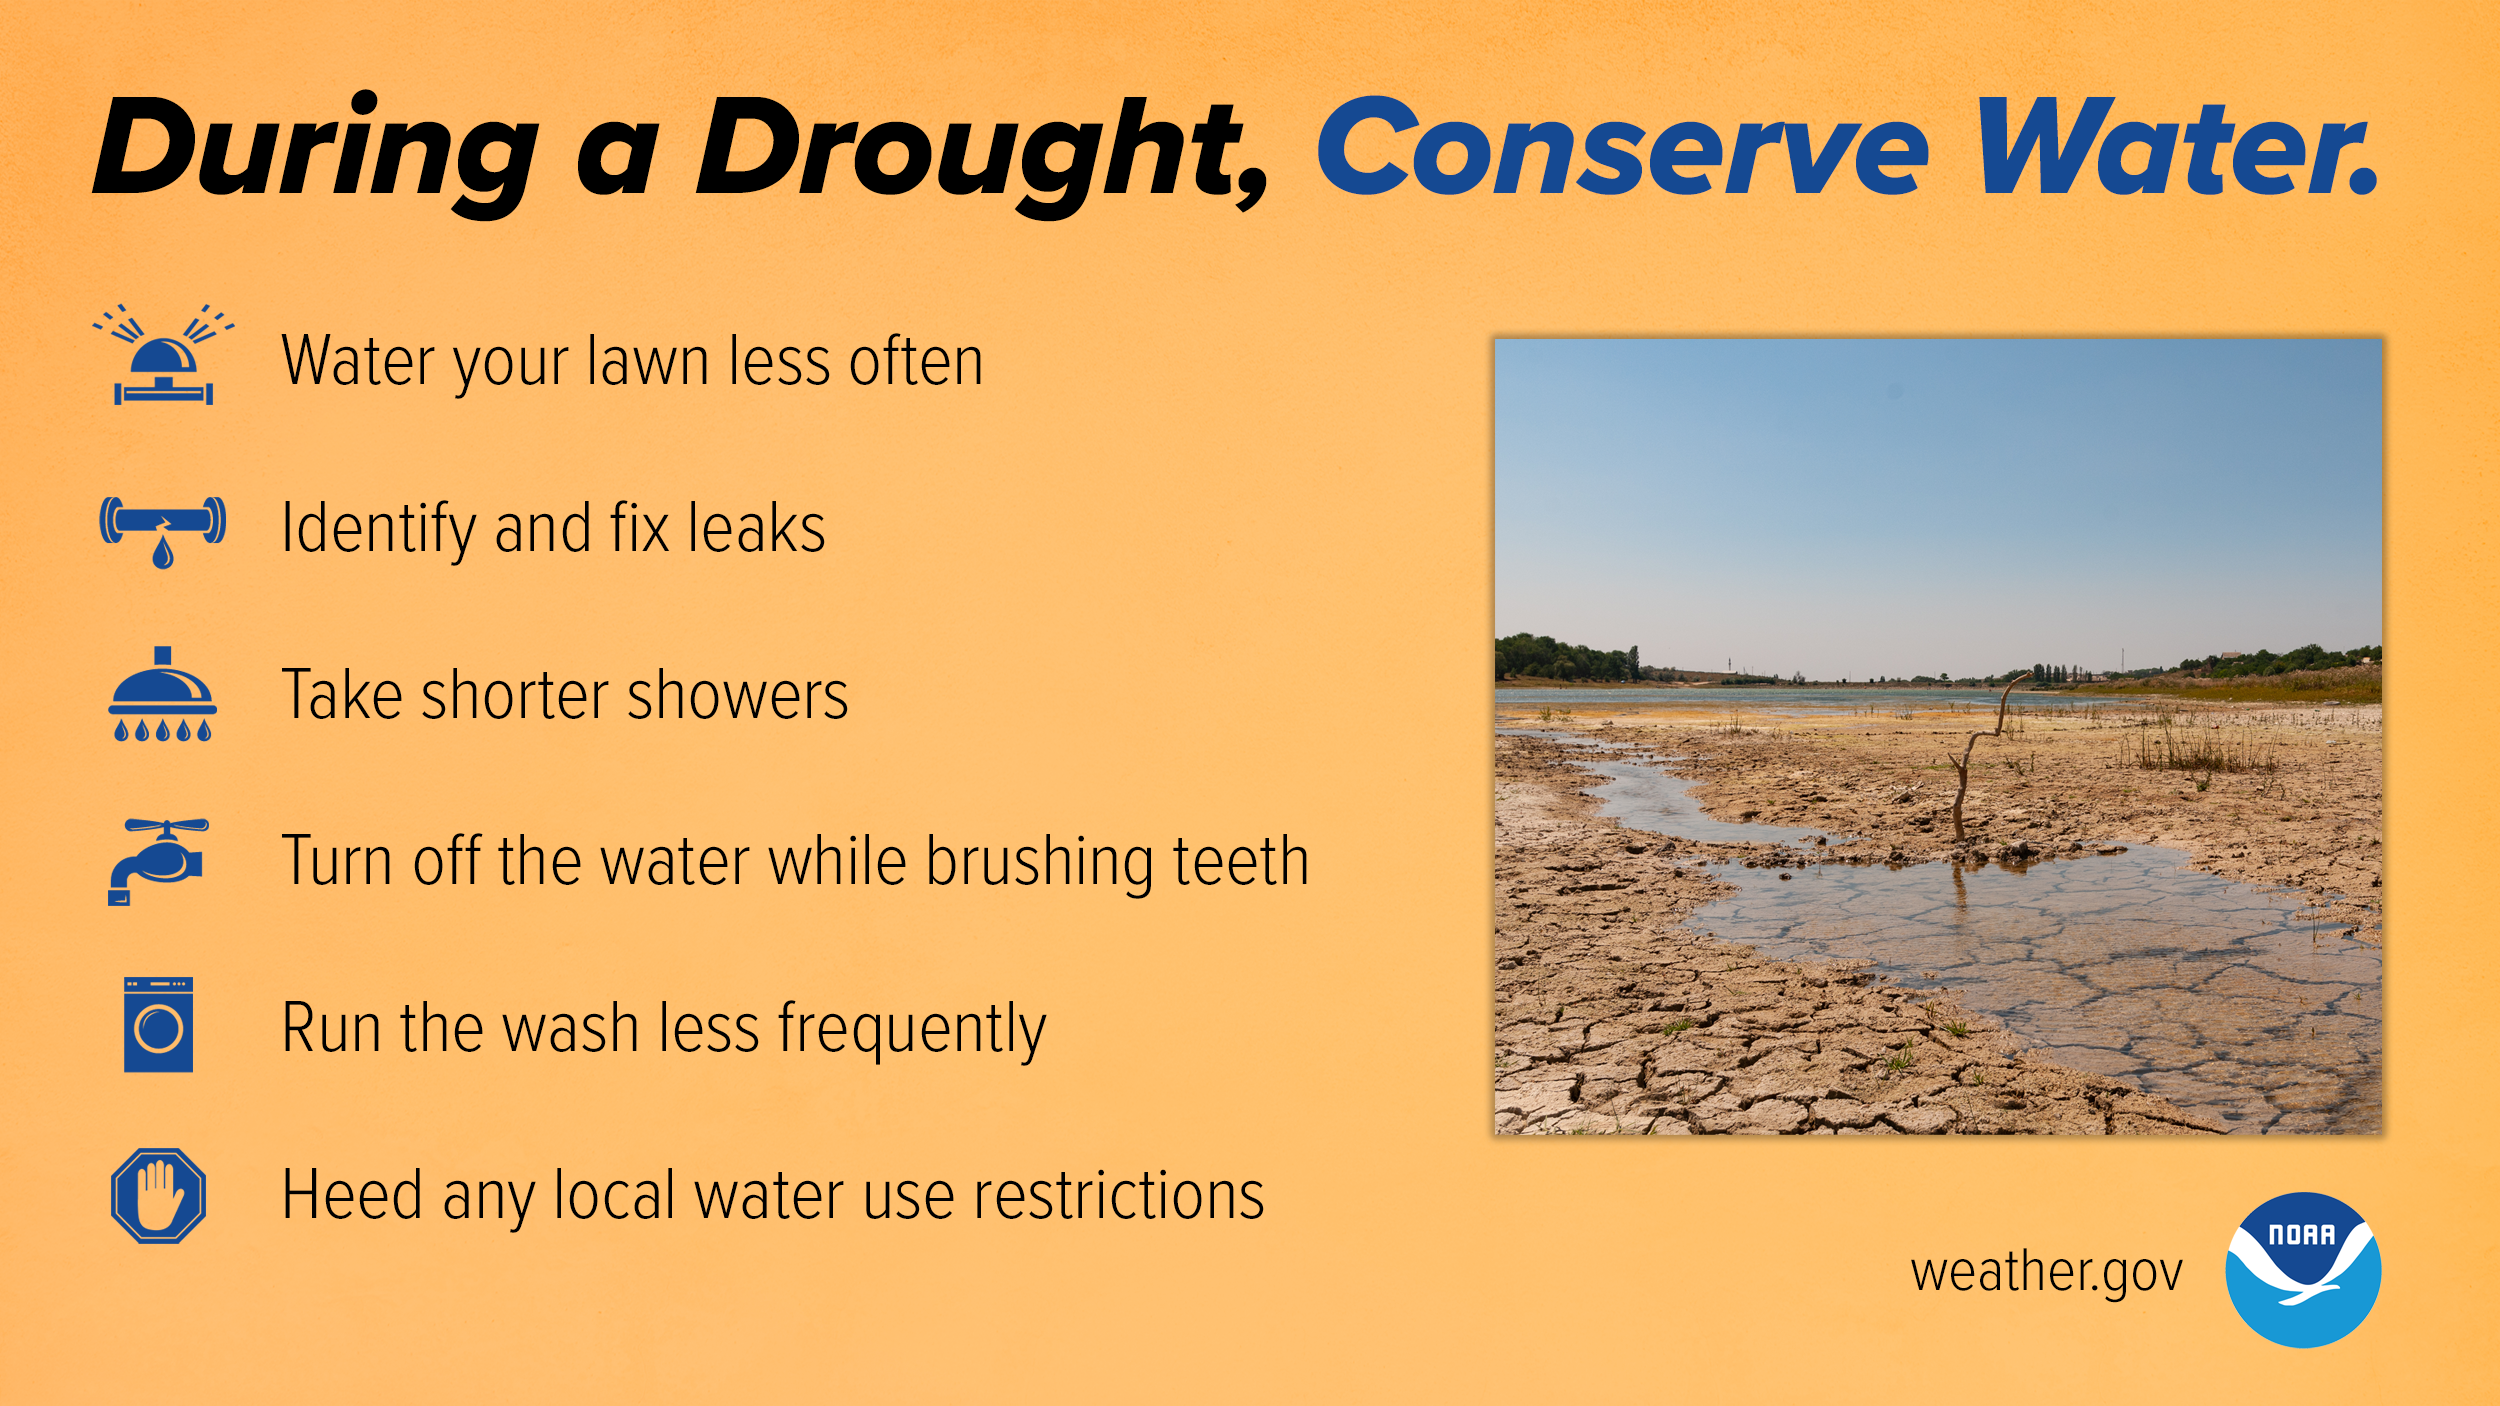 During a drought, conserve water. Water your lawn less often. Identify and fix leaks. Take shorter showers. Turn off the water while brushing teeth. Run the wash less frequently. Heed any local water use restrictions.